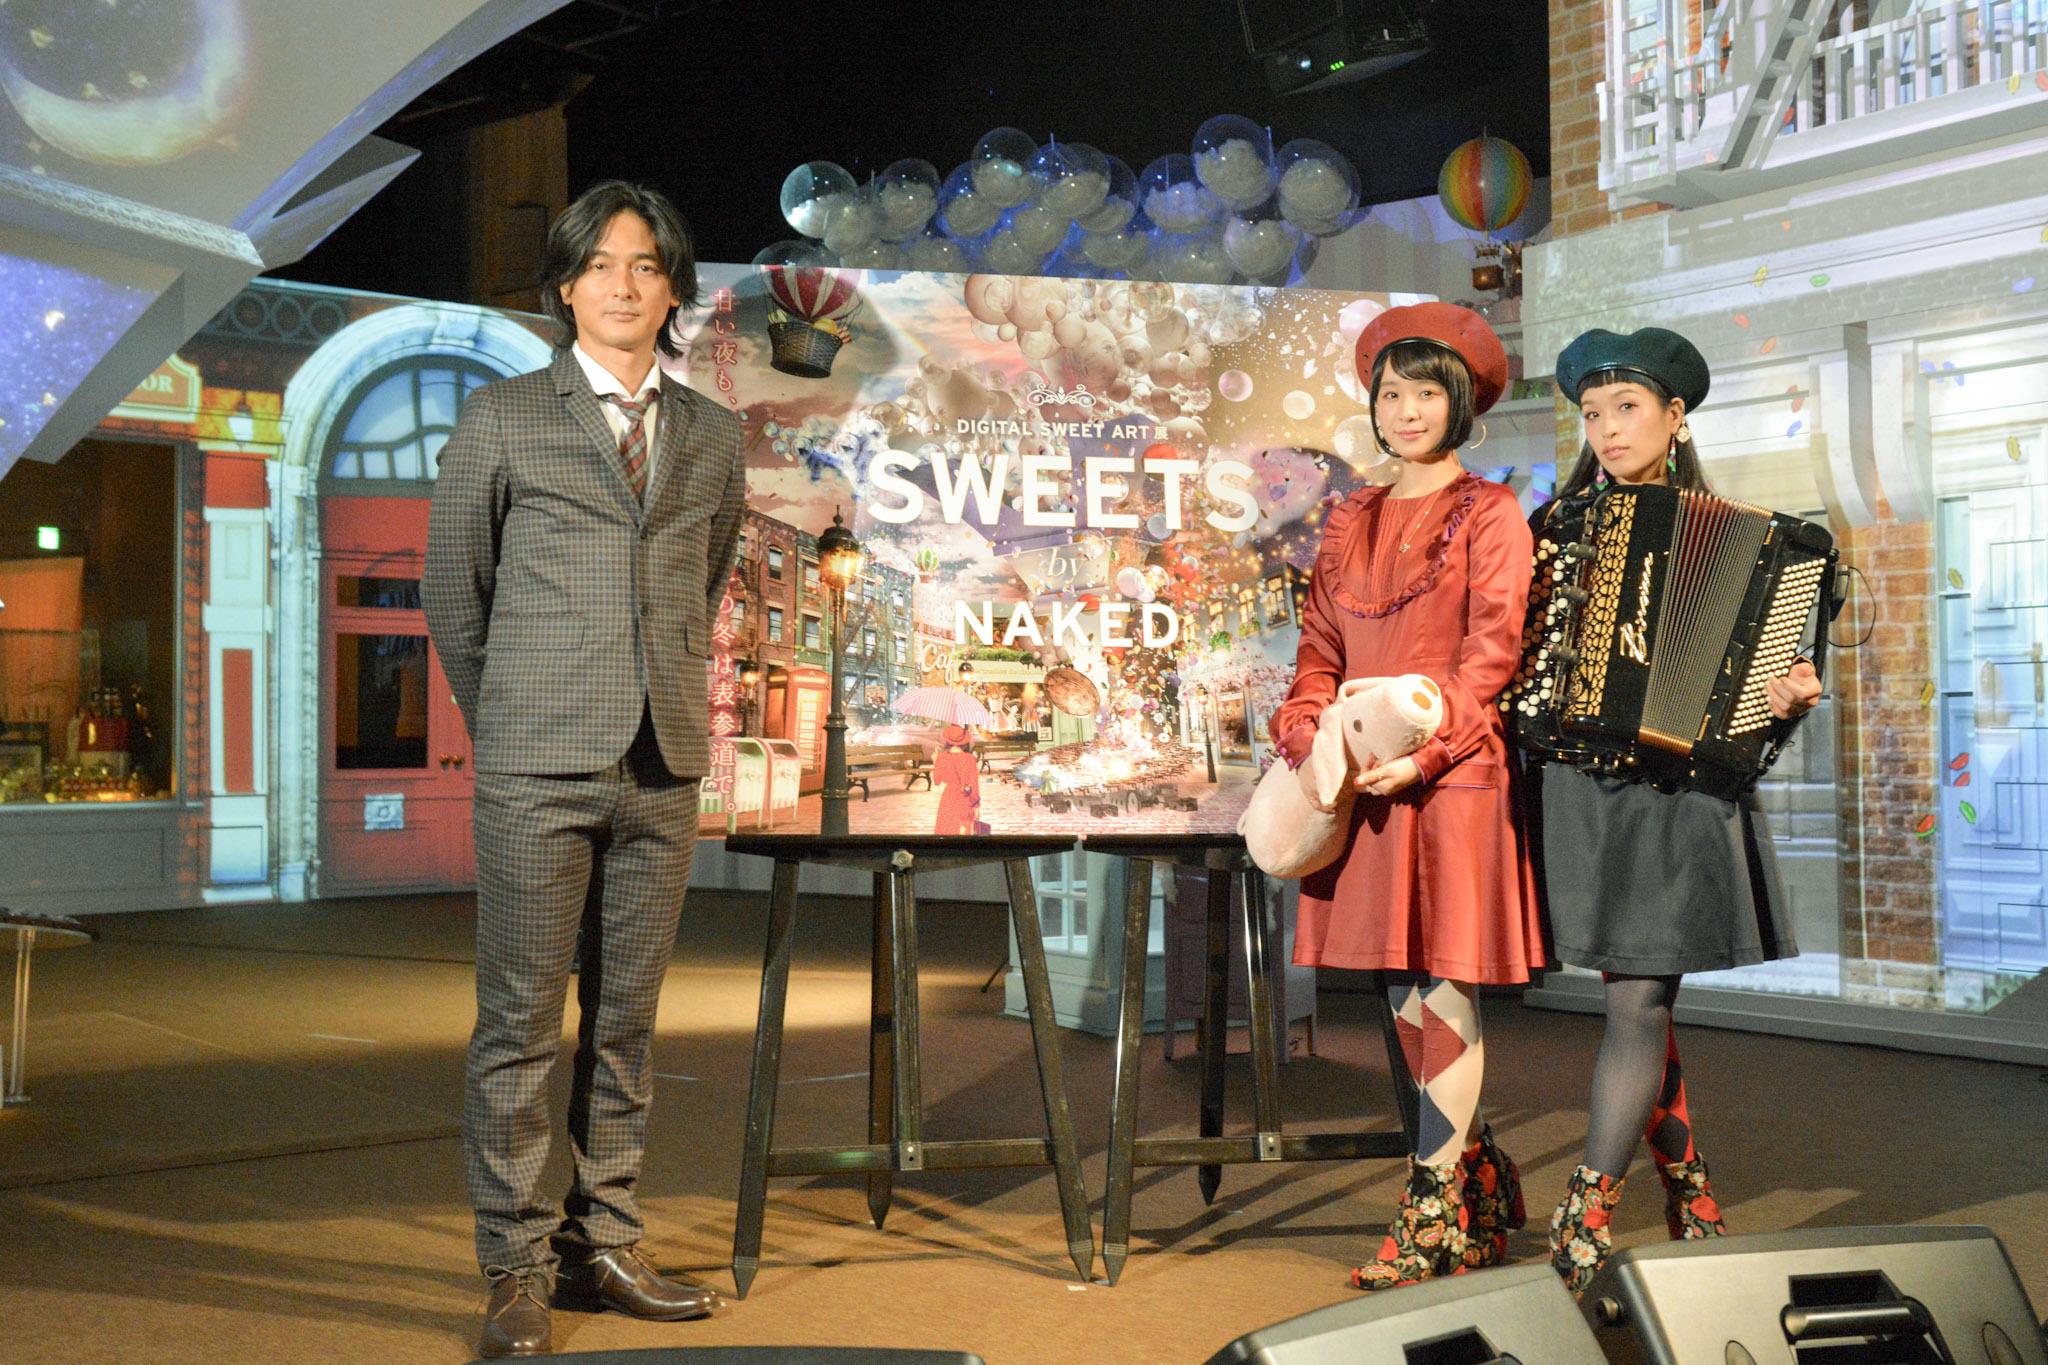 『SWEETS by NAKED』プレス向け内覧会